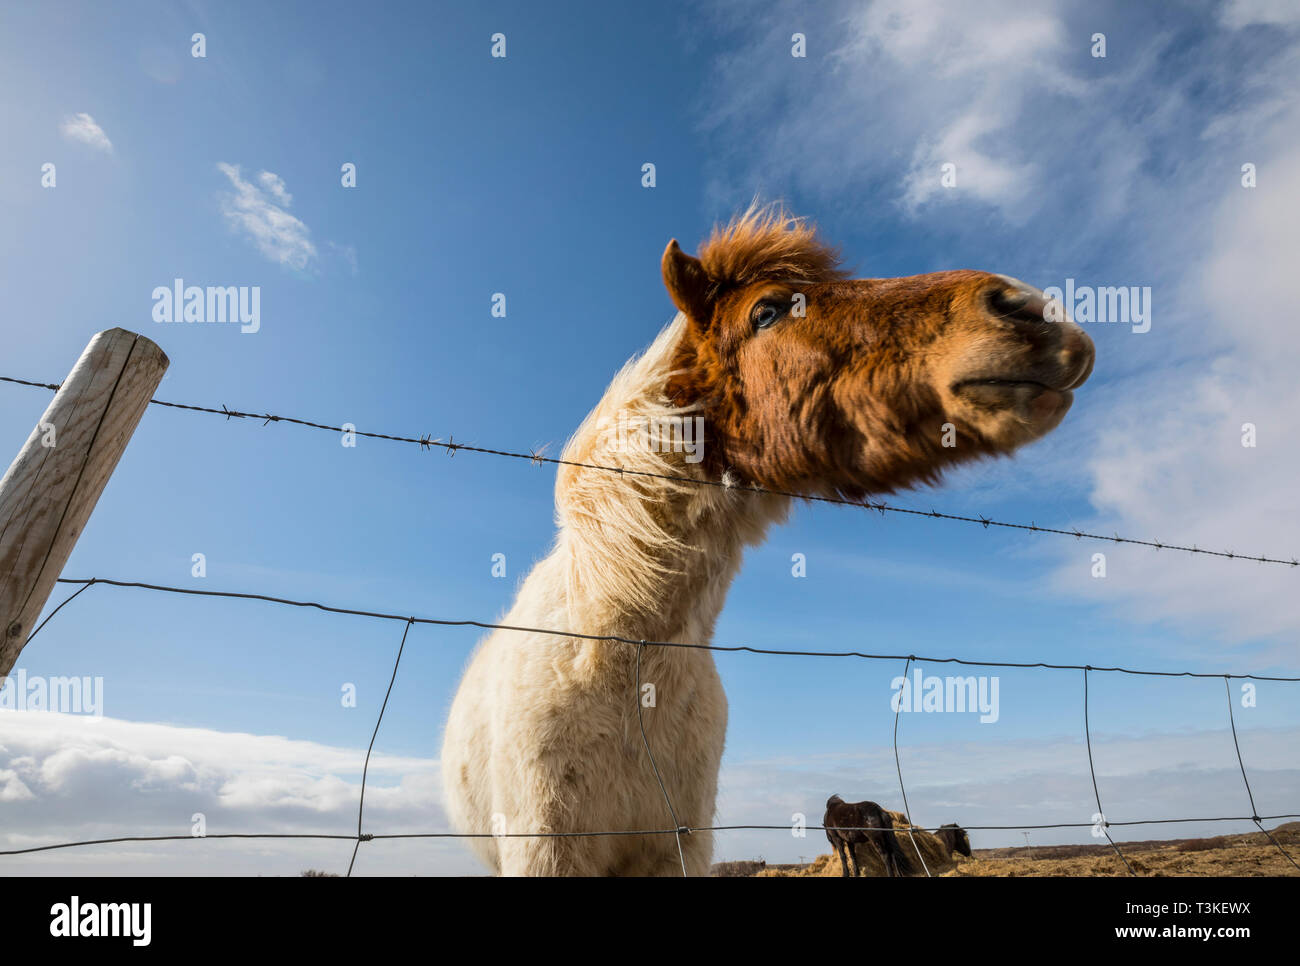 Iceladdc horse with barbed wire fence Stock Photo